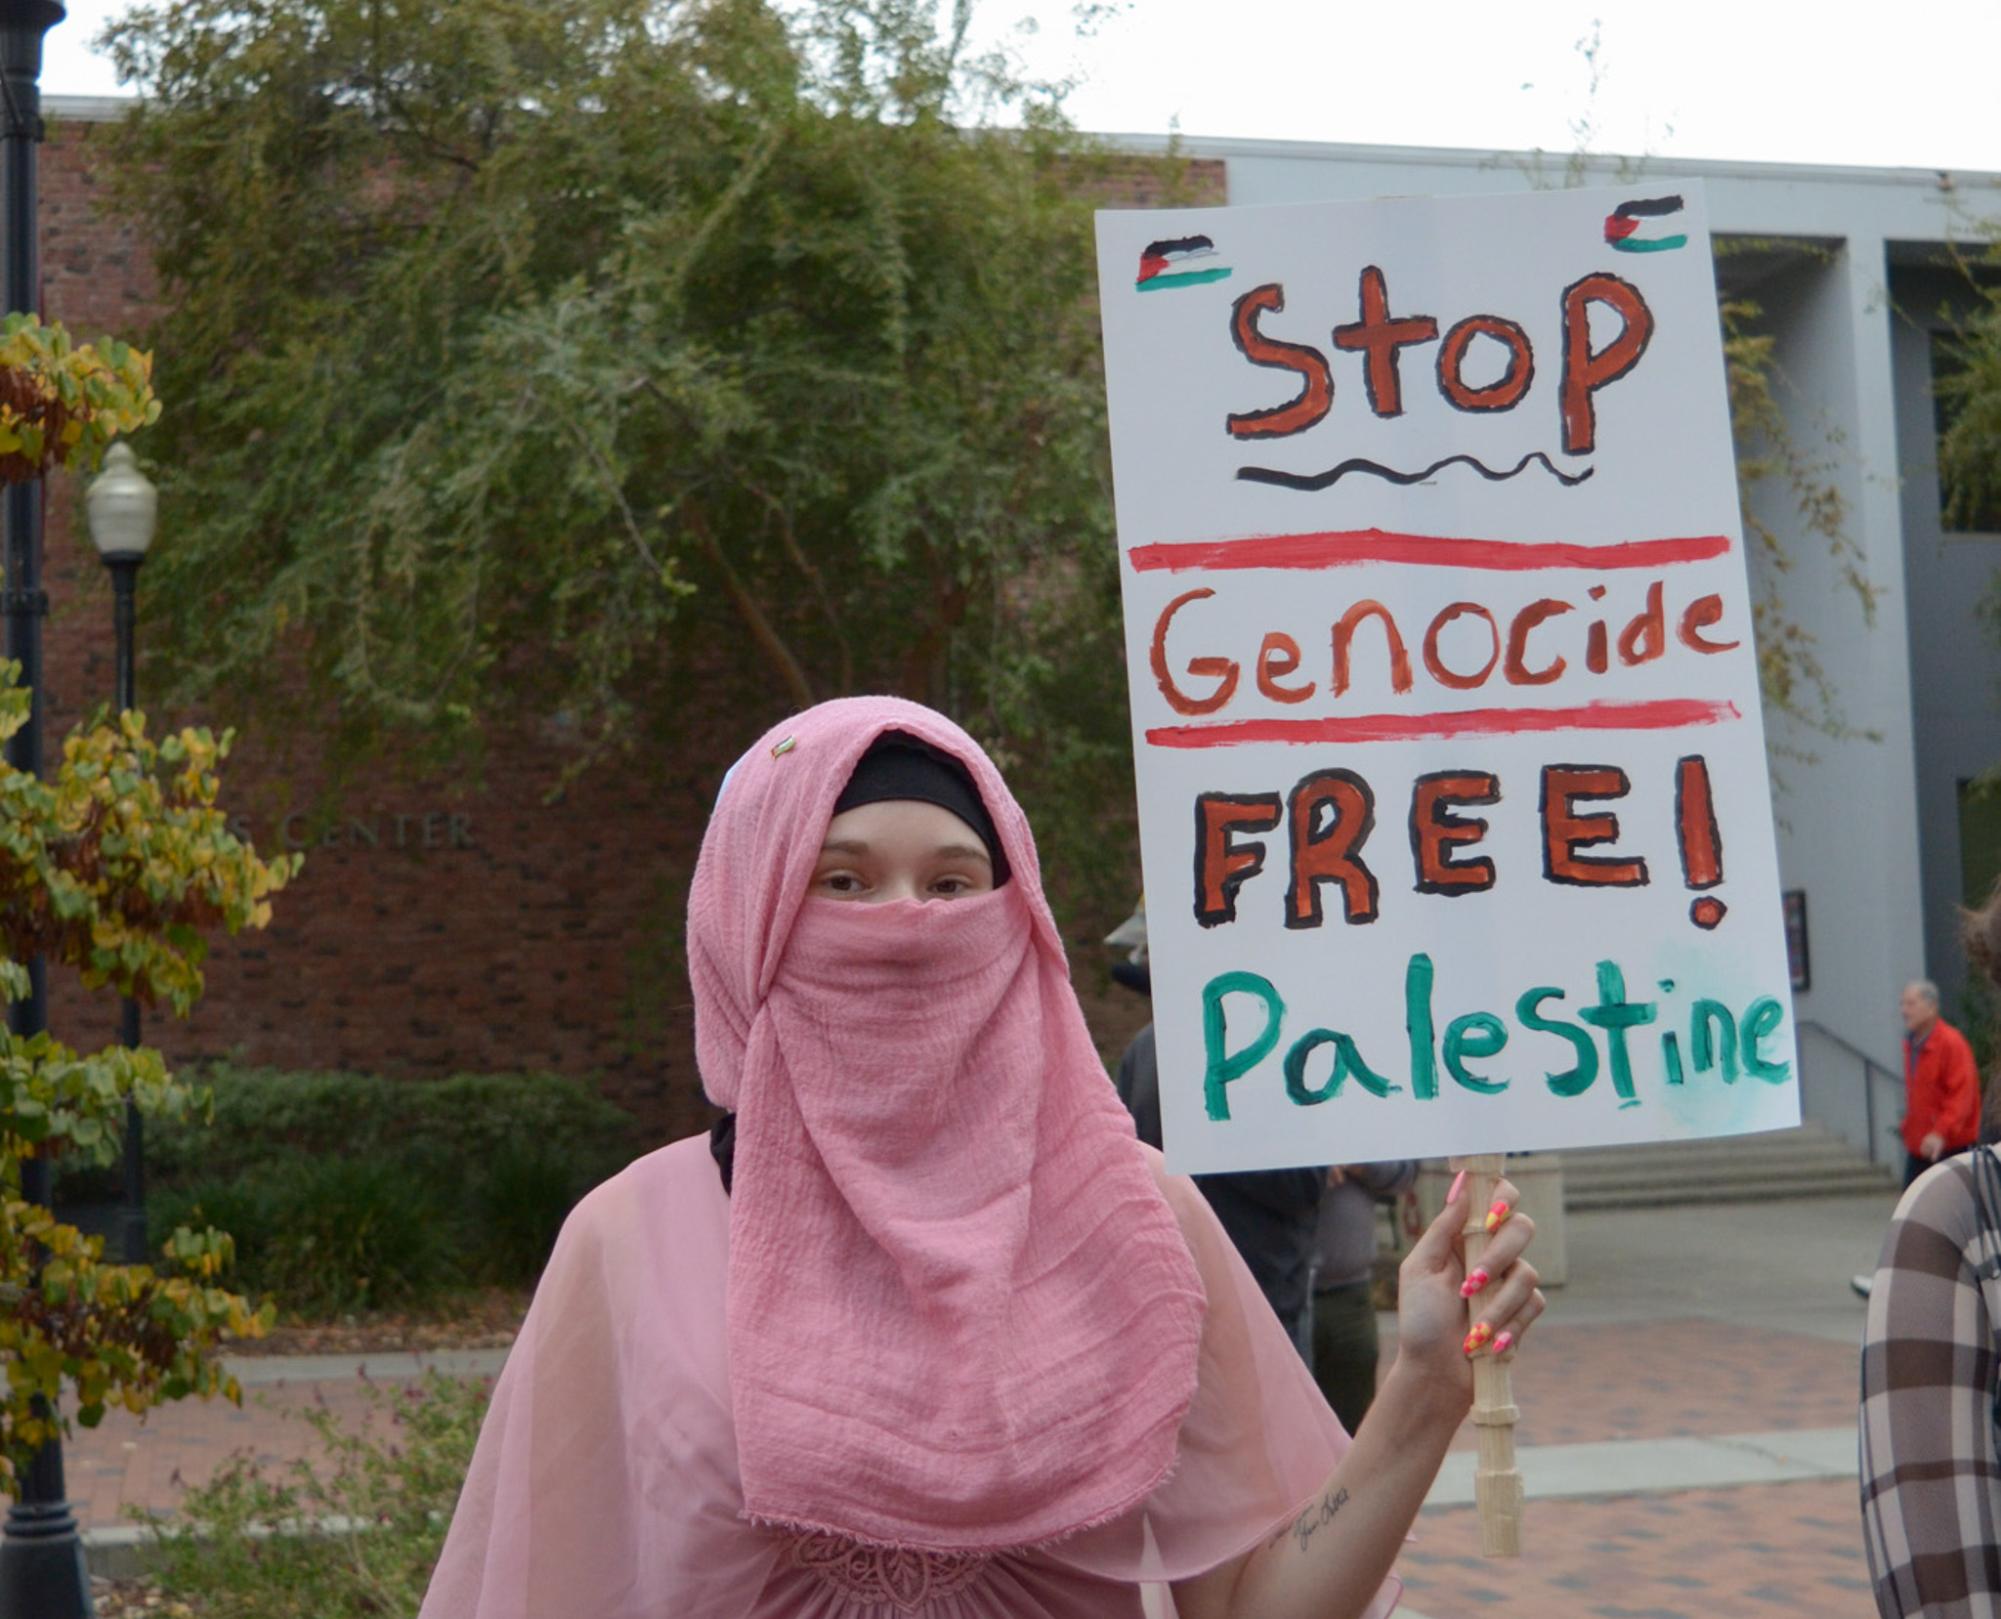 A Nov. 19, 2023 Palestine Walkout attendee holds a sign that reads “Stop Genocide Free! Palestine.” Taken on Nov. 19, 2023